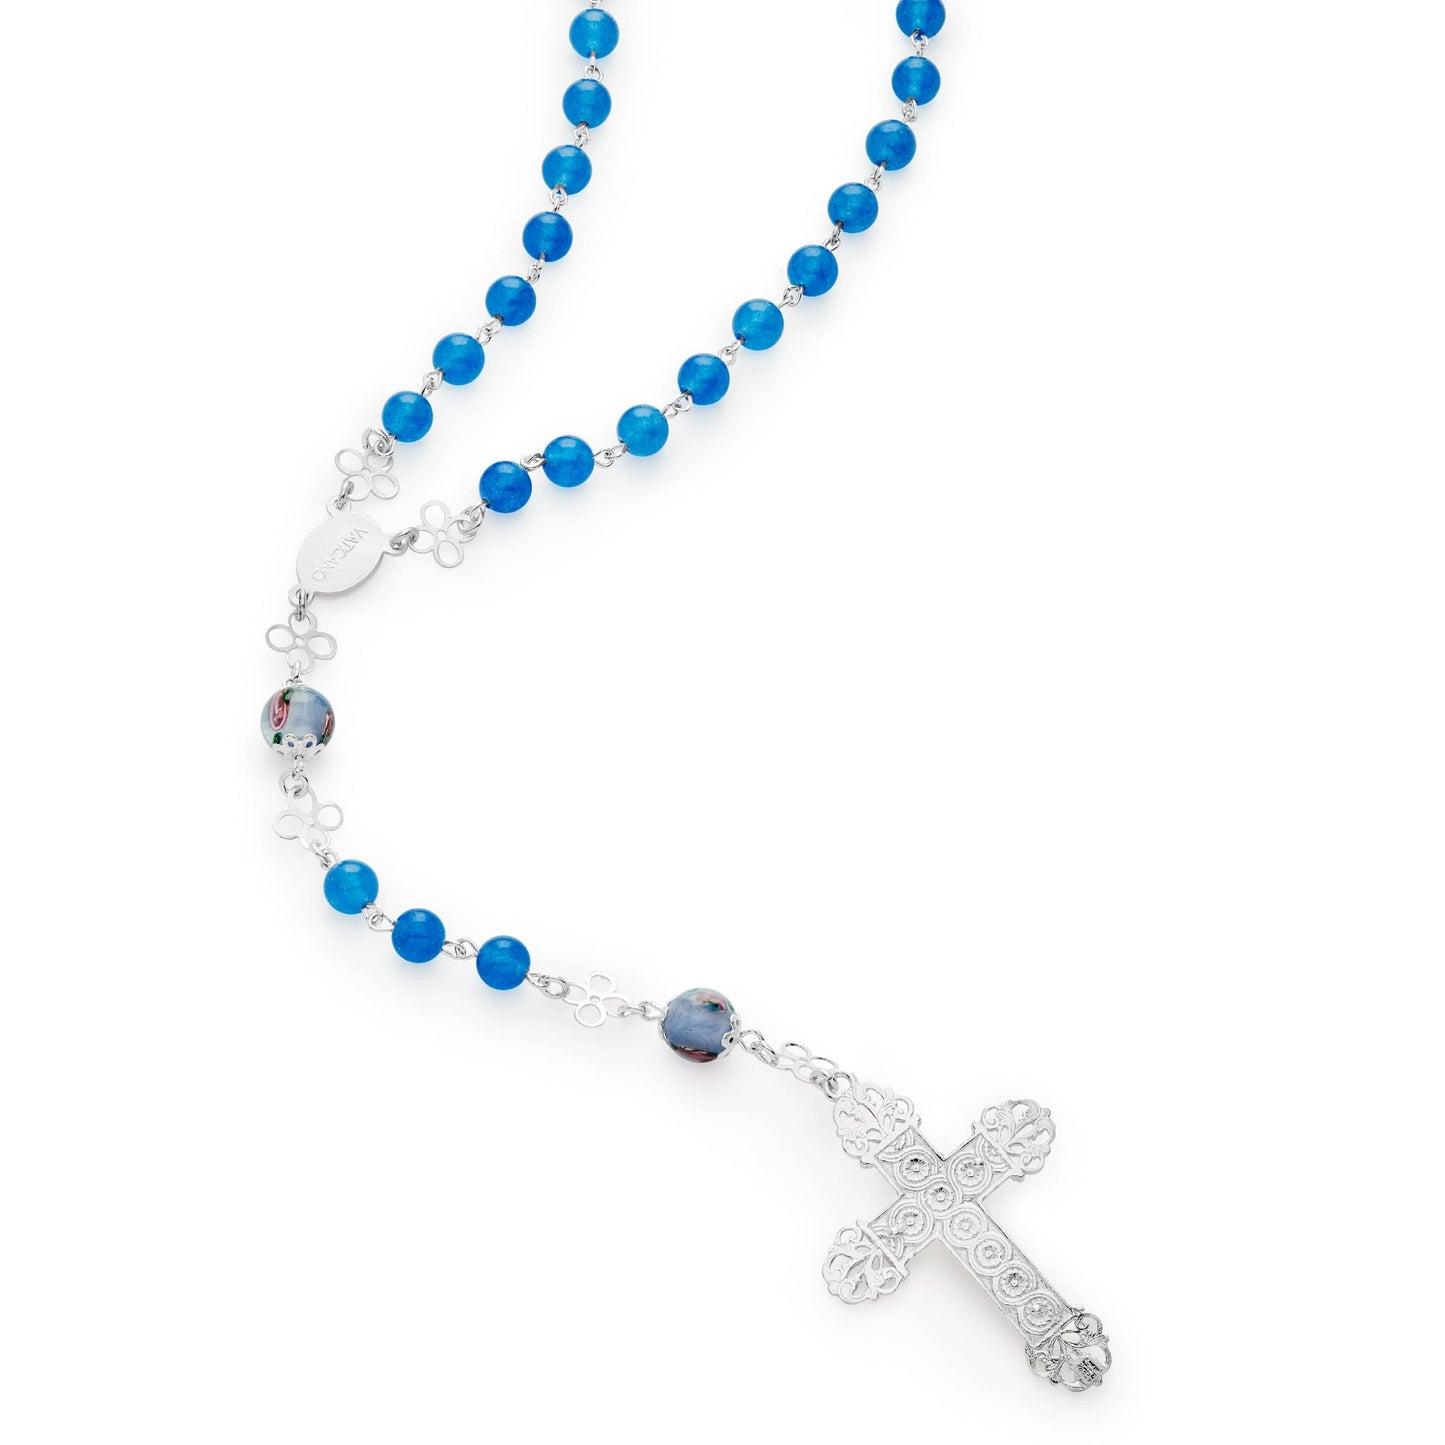 MONDO CATTOLICO Prayer Beads 51 Cm (20.07 in) / 6 mm (0.23 in) Sterling Silver Rosary in Blue Agate